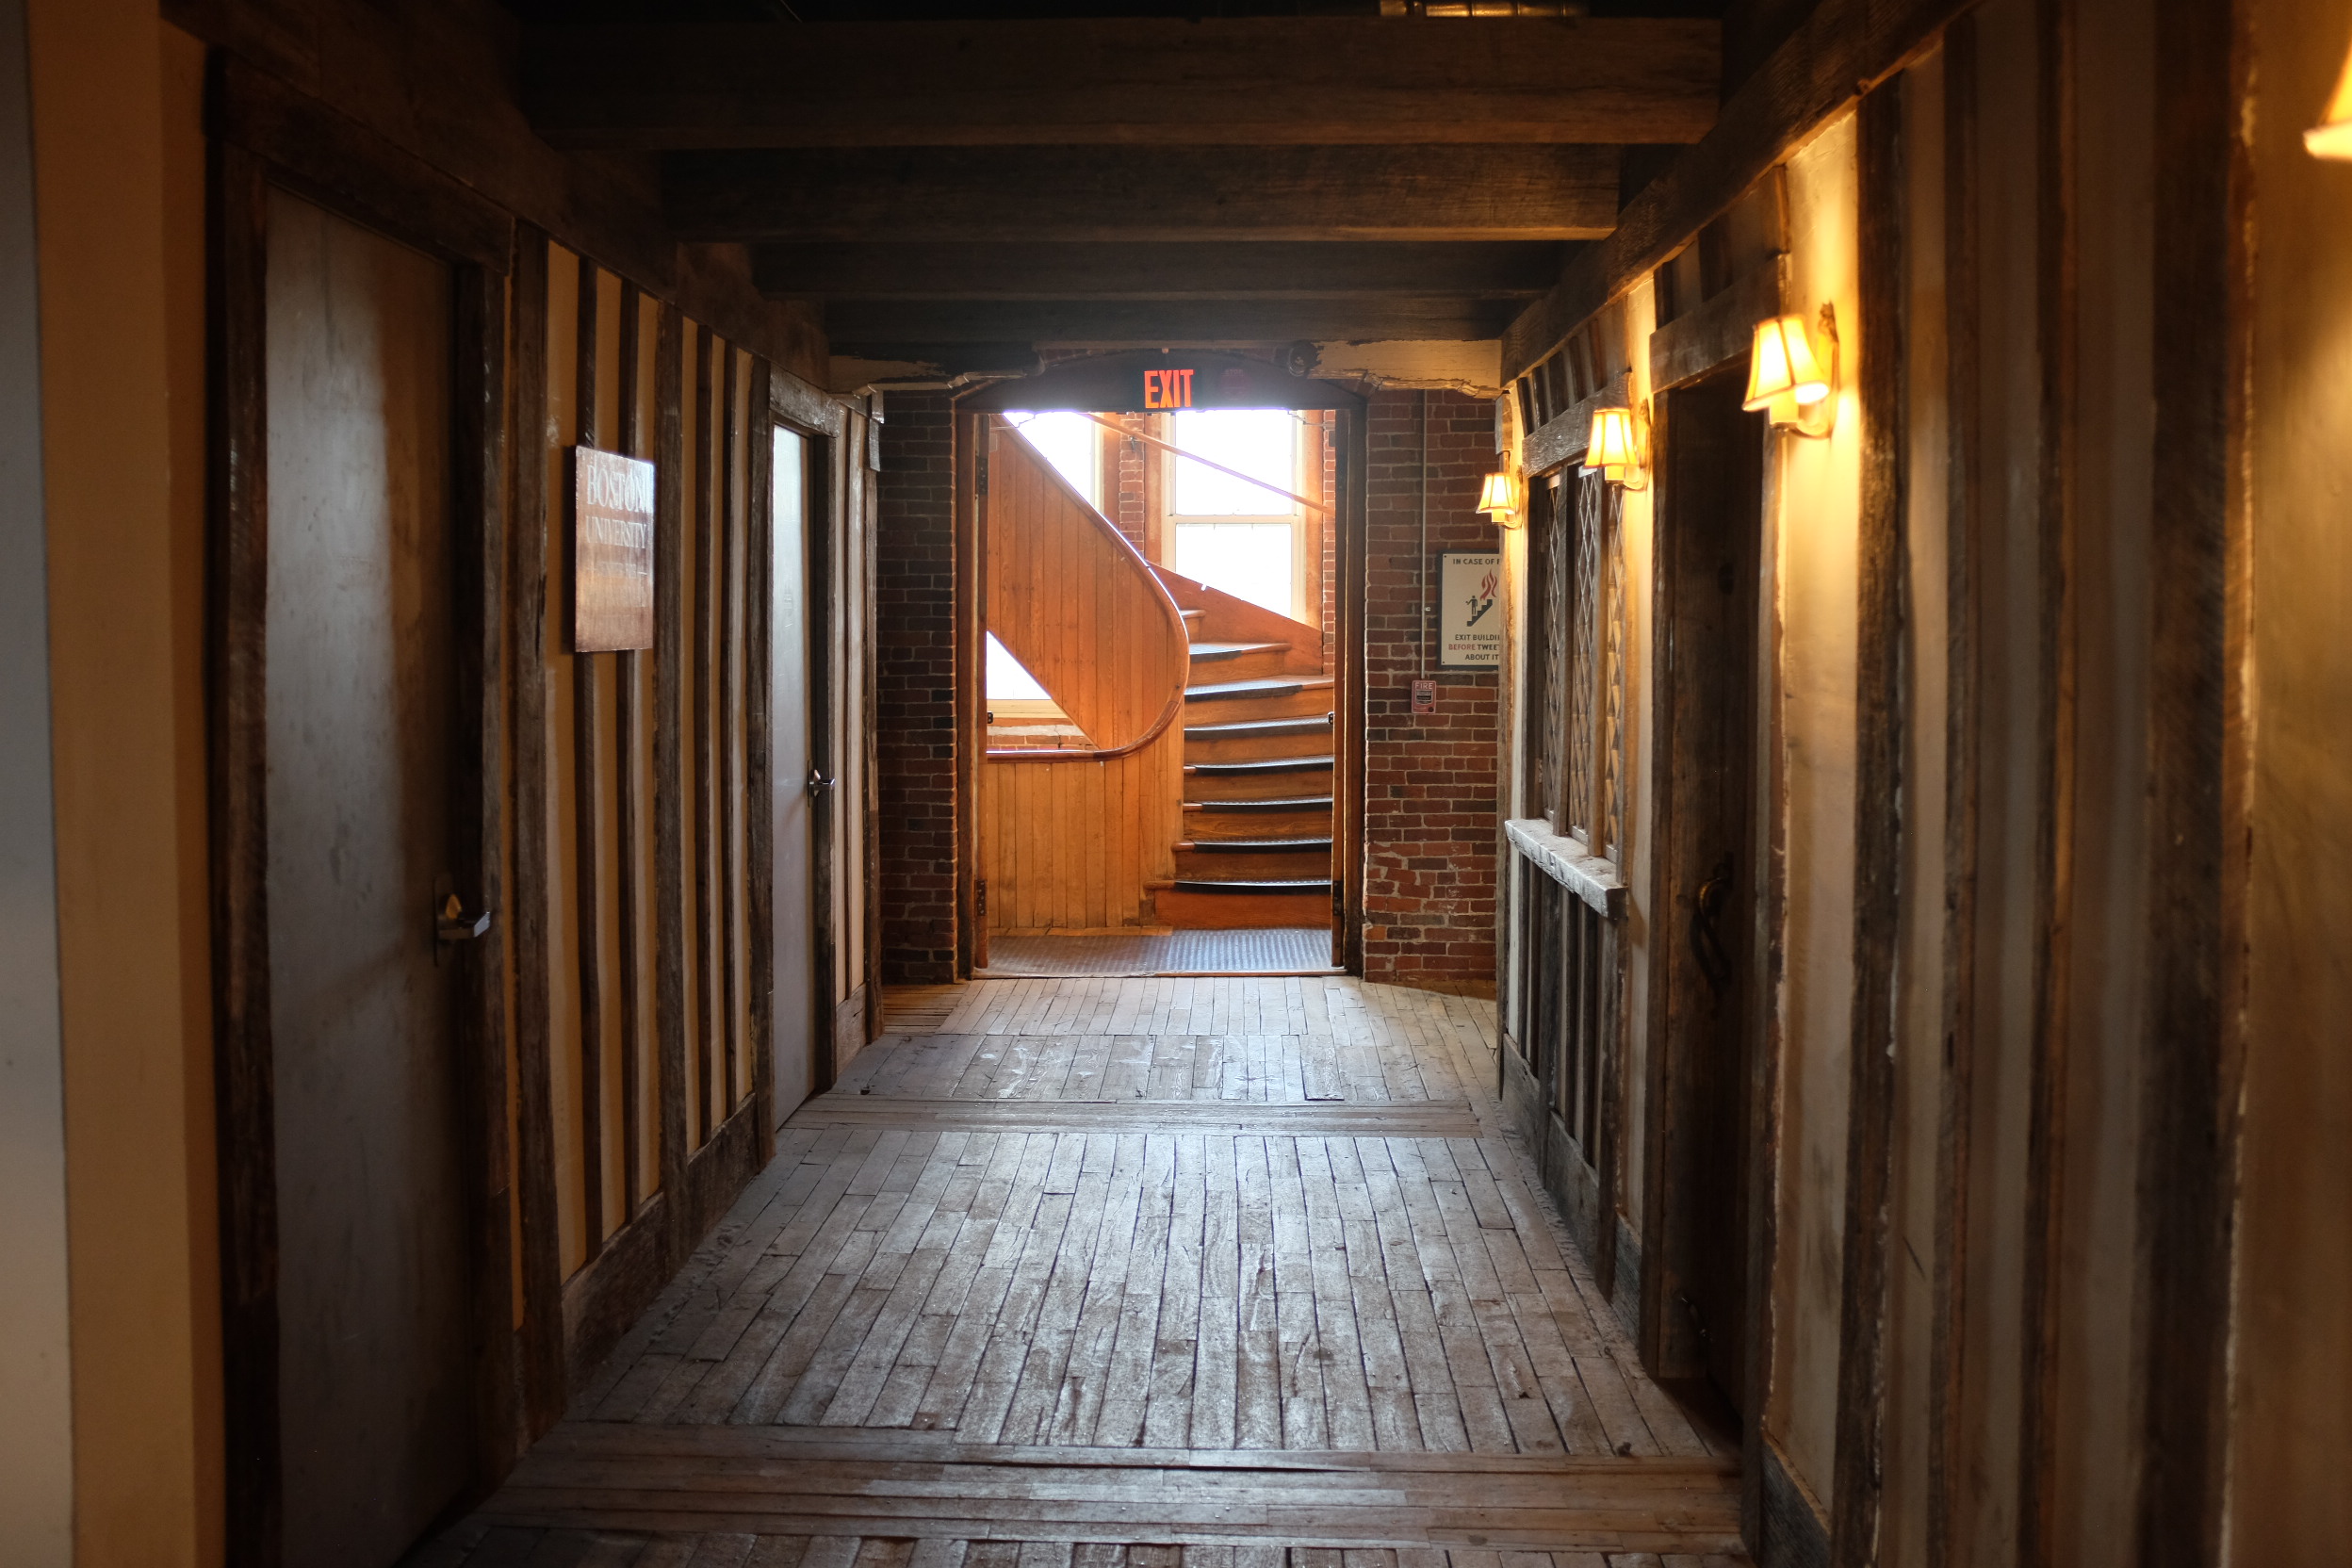 A photo of an old wooden hallway with a spiral staircase curving upwards visible through a door at the end.